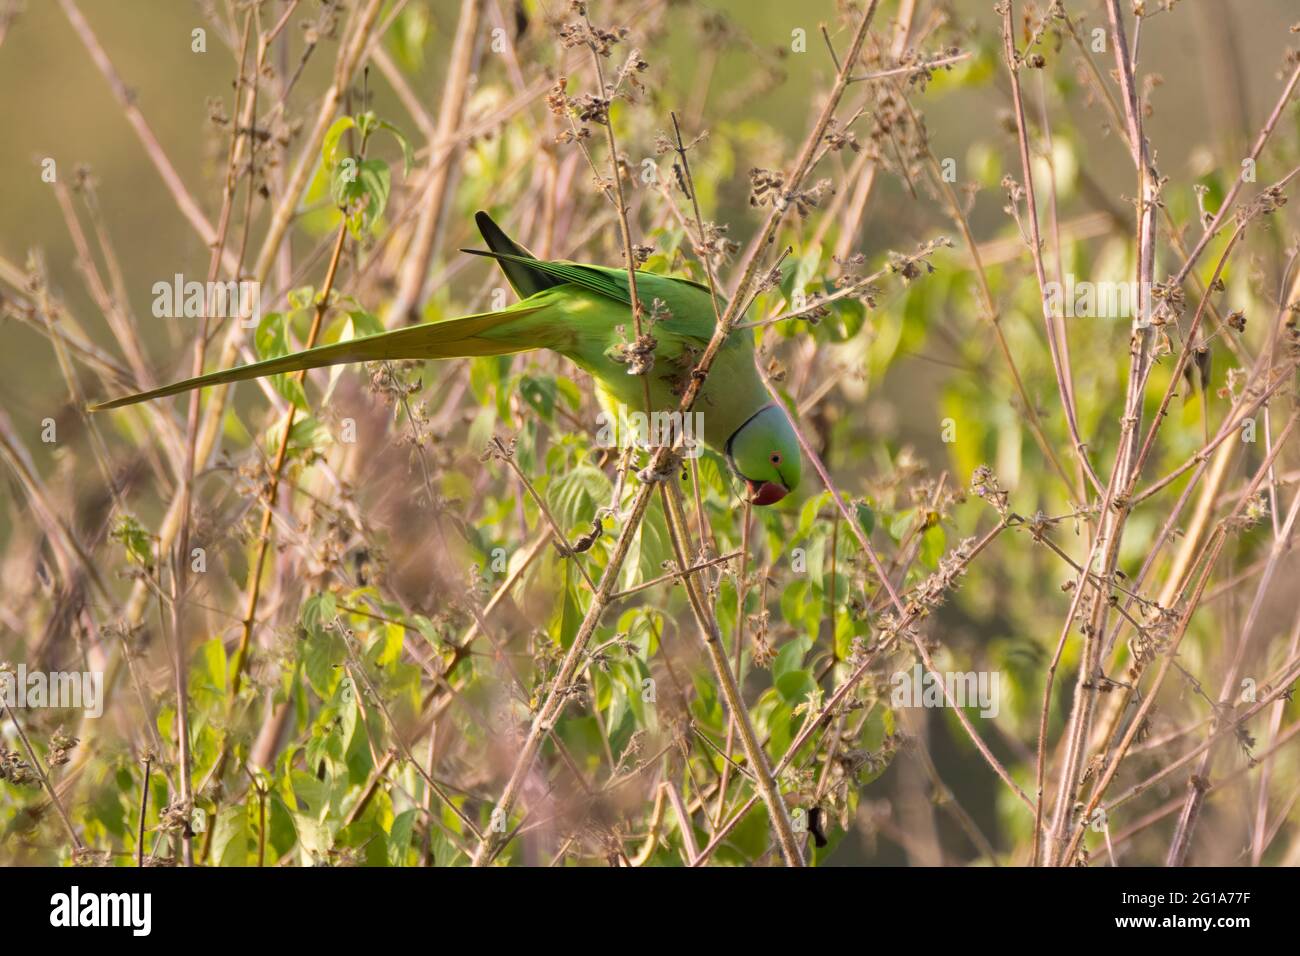 A beautiful green colored male Rose-ringed parakeet (Psittacula krameri), perched on some dead vegetation in the wild. Also called the Ring-necked par Stock Photo